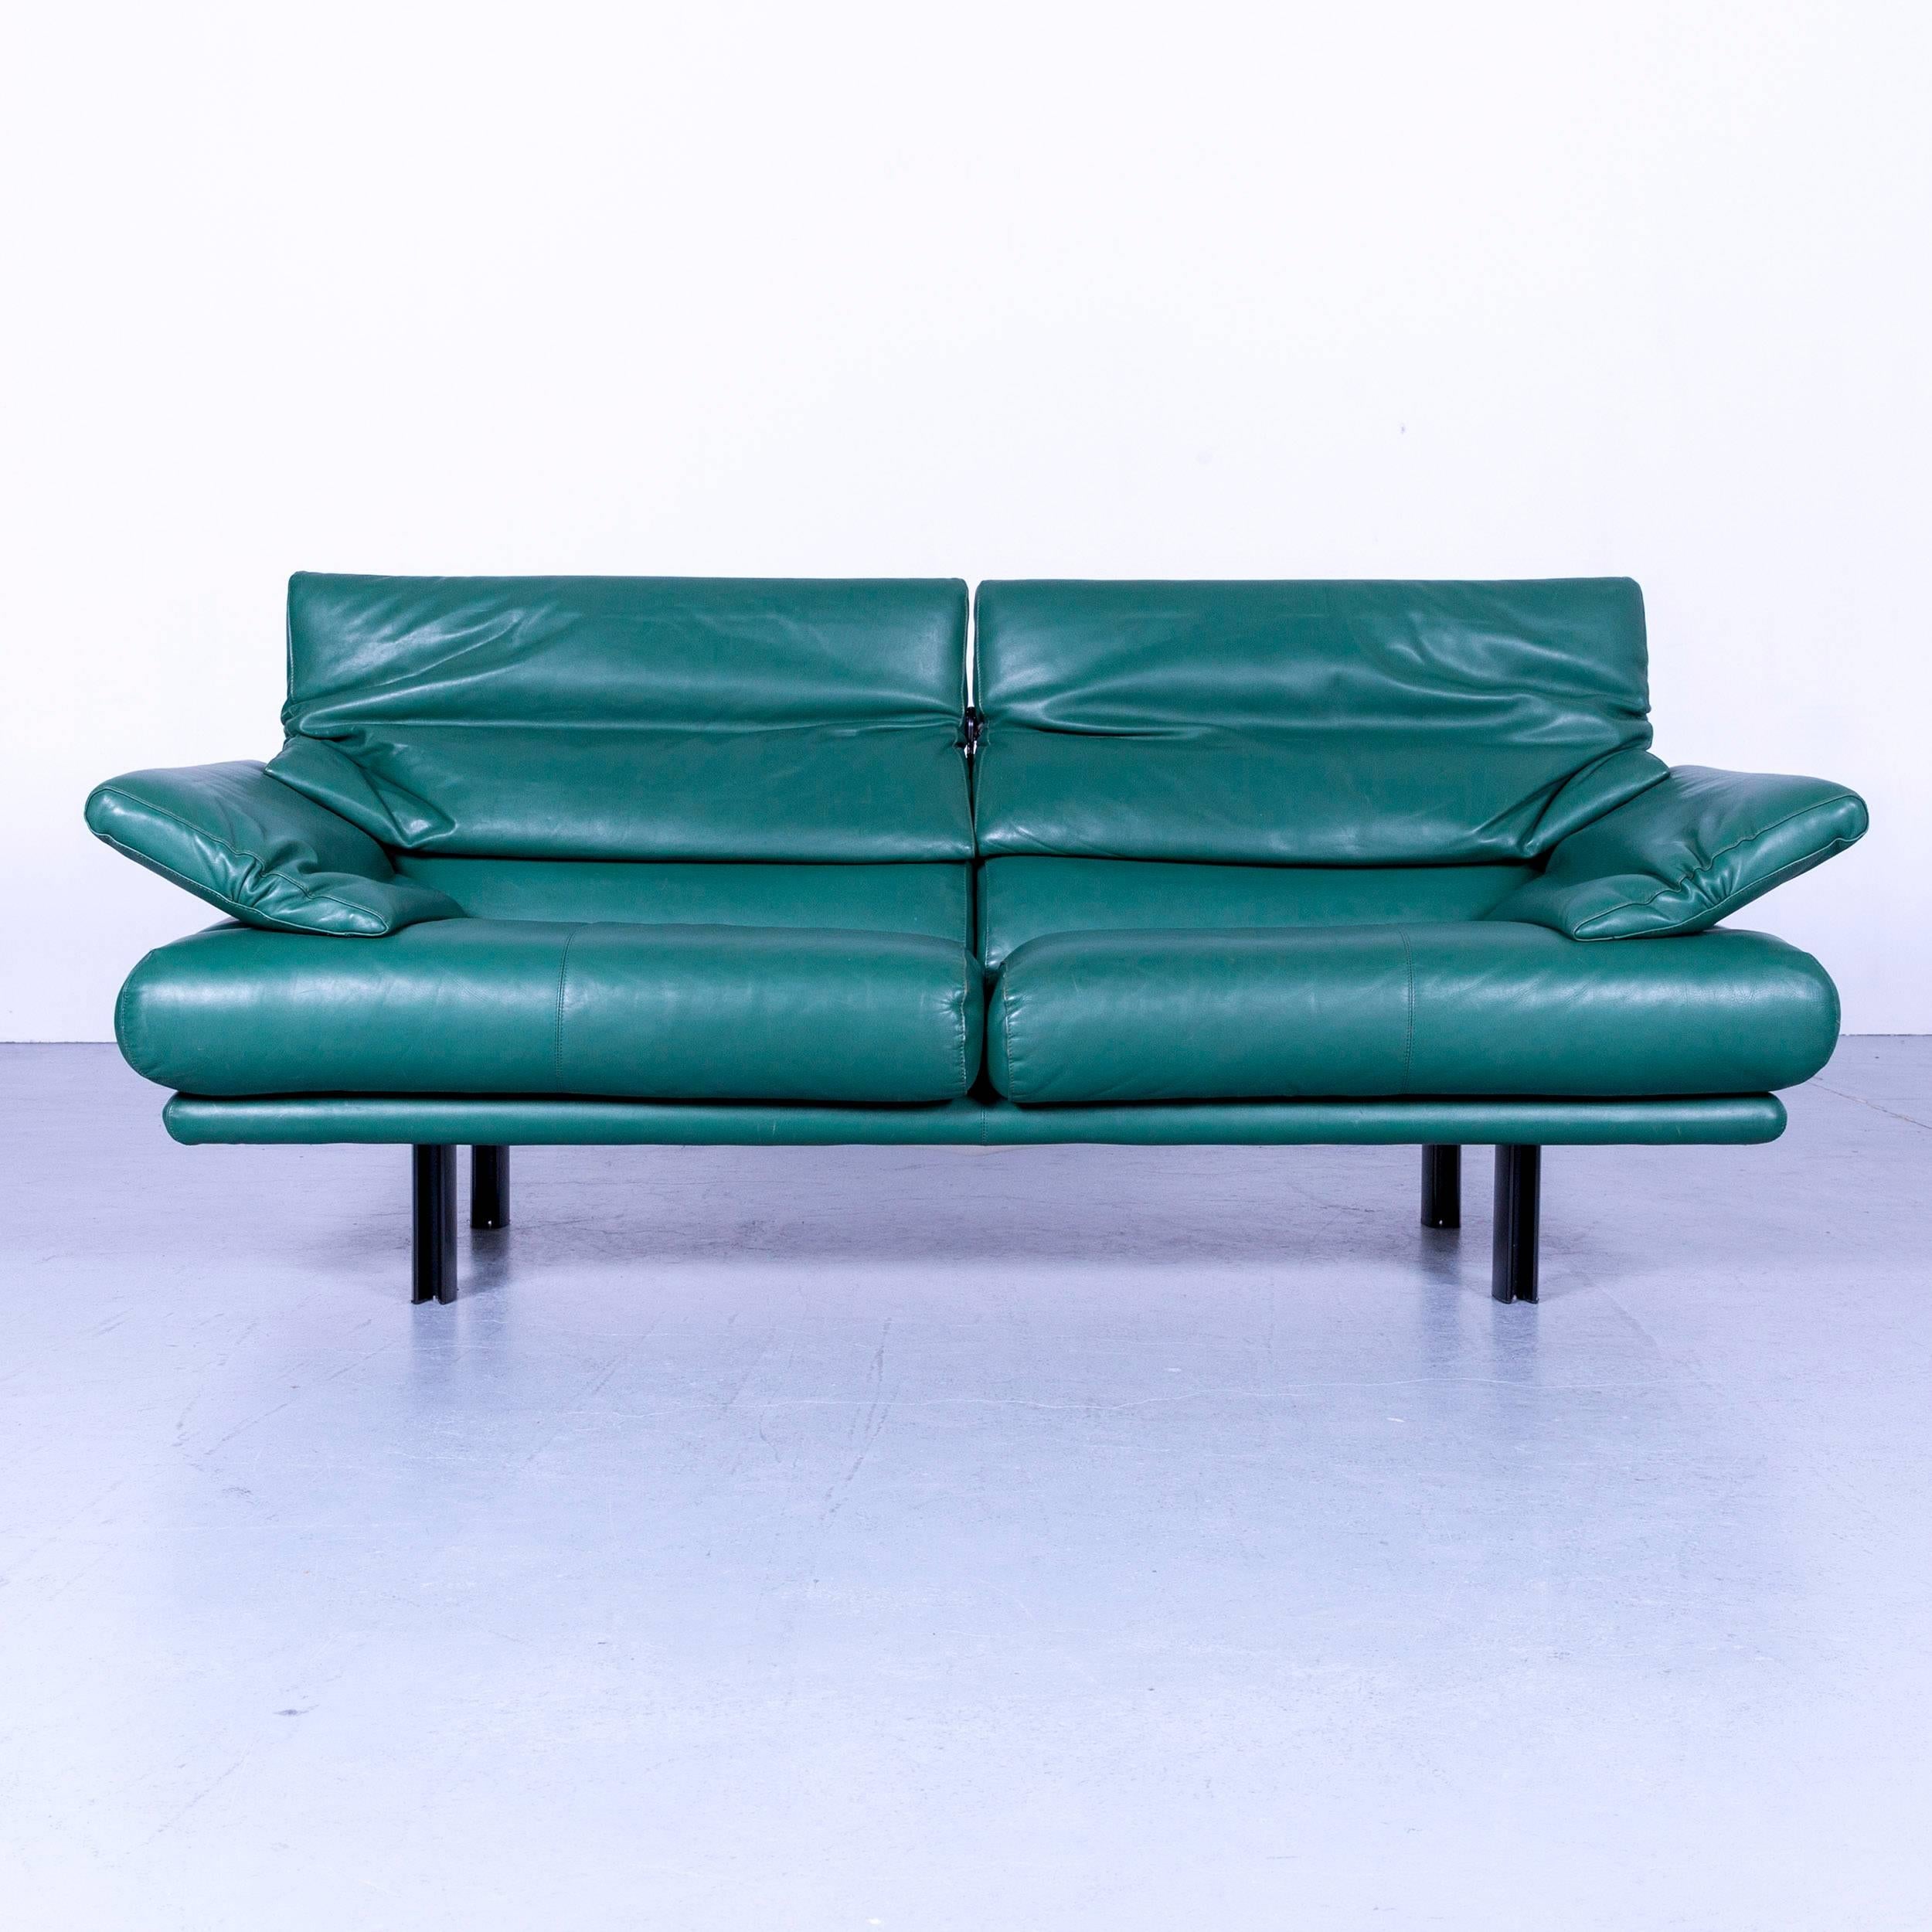 B & B Italia Alanda Leather Sofa Turquoise Blue Two-Seat In Good Condition For Sale In Cologne, DE